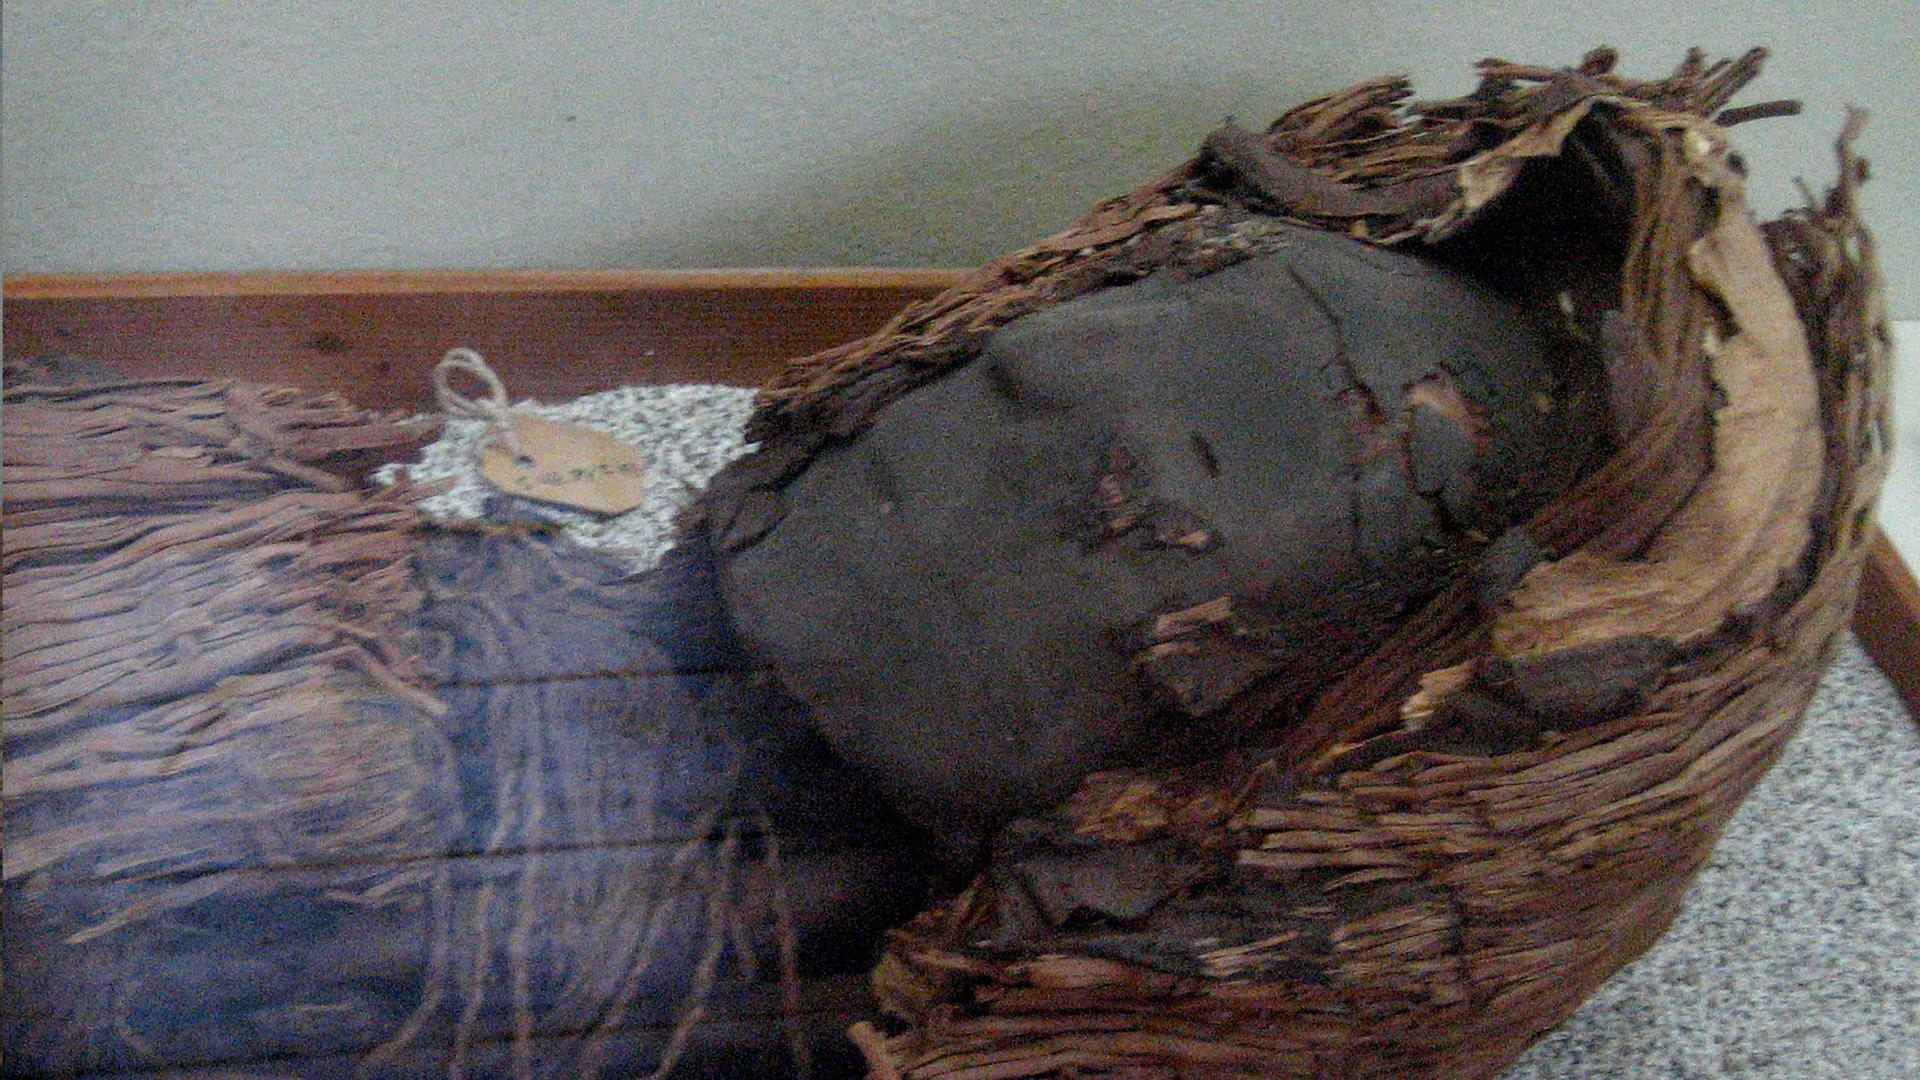 The head of a mummy from the Chinchorro culture, which is found in northern Chile.